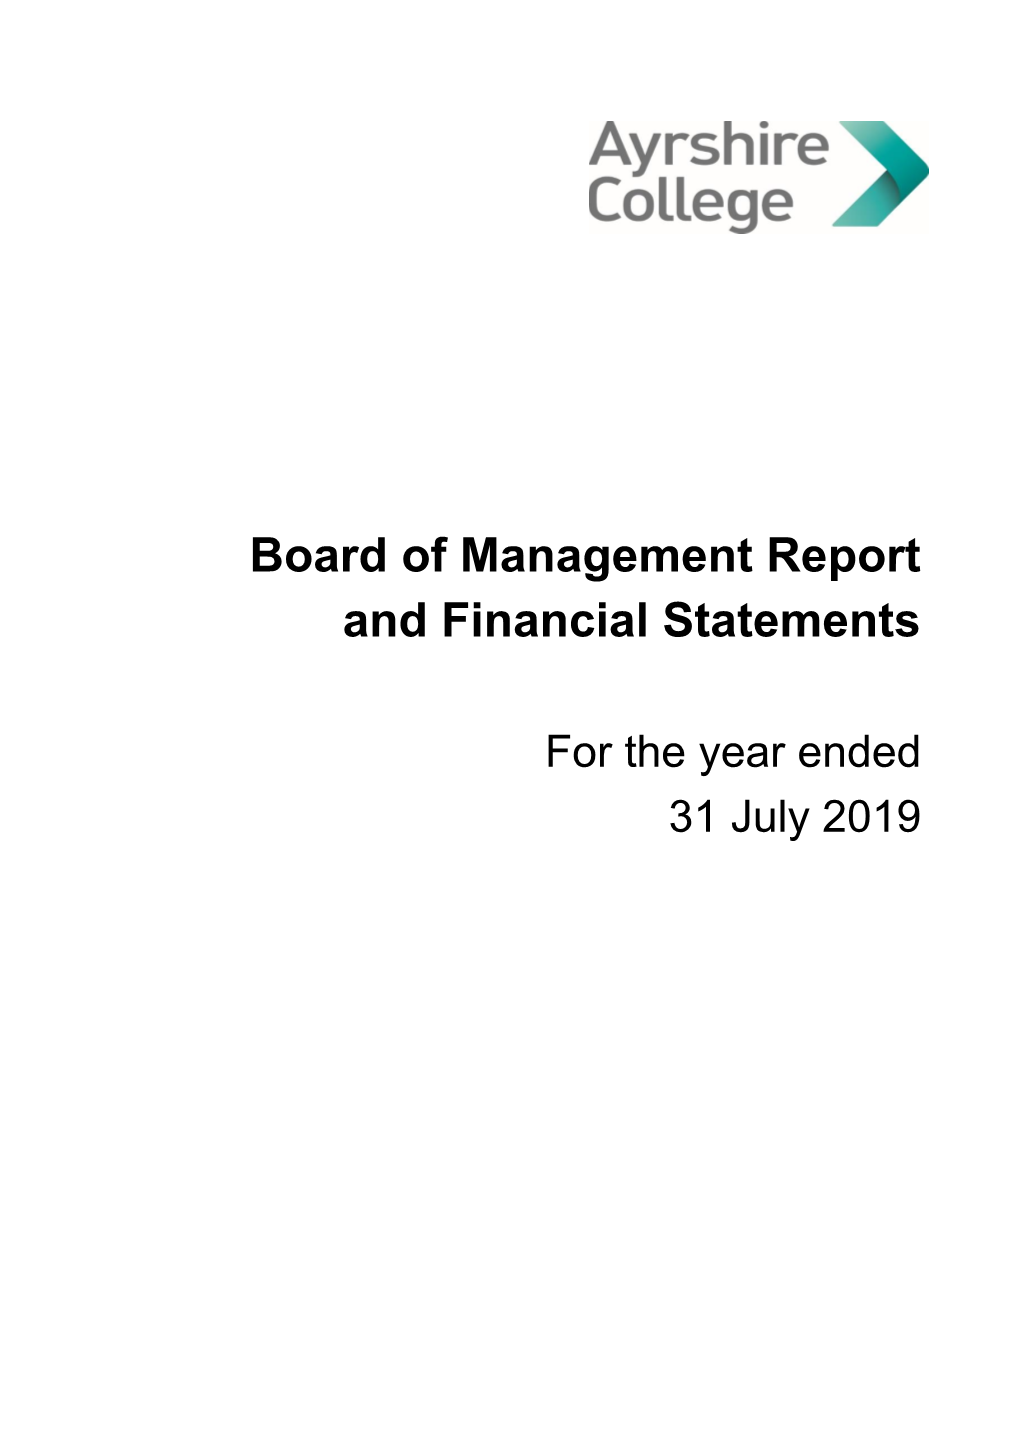 Board of Management Report and Financial Statements